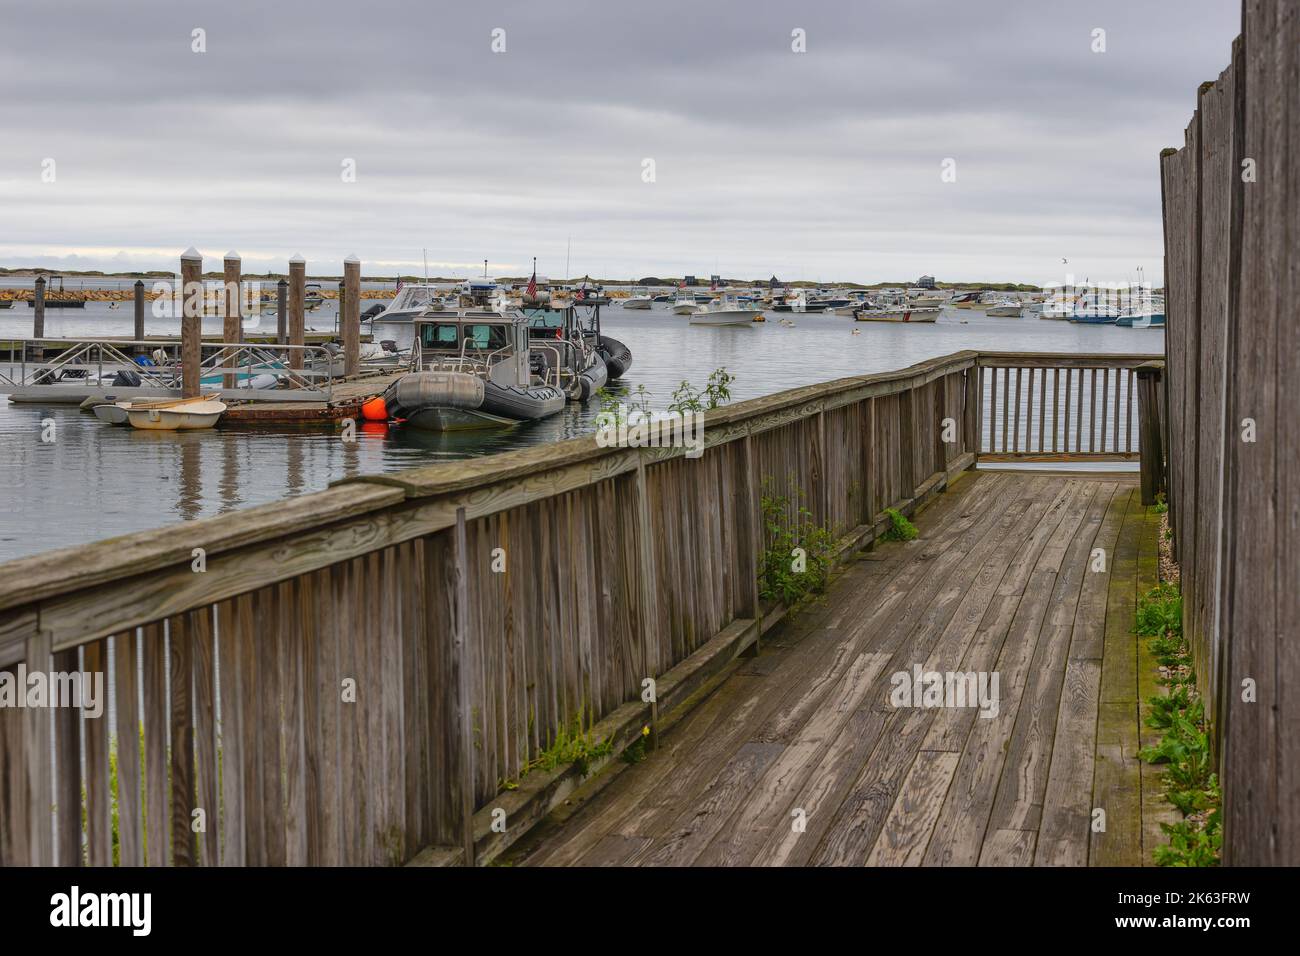 Plymouth, Massachusetts, USA - September 12, 2022: A wooden walkway next to a building overlooking Plymouth Harbor under cloudy skies. Stock Photo